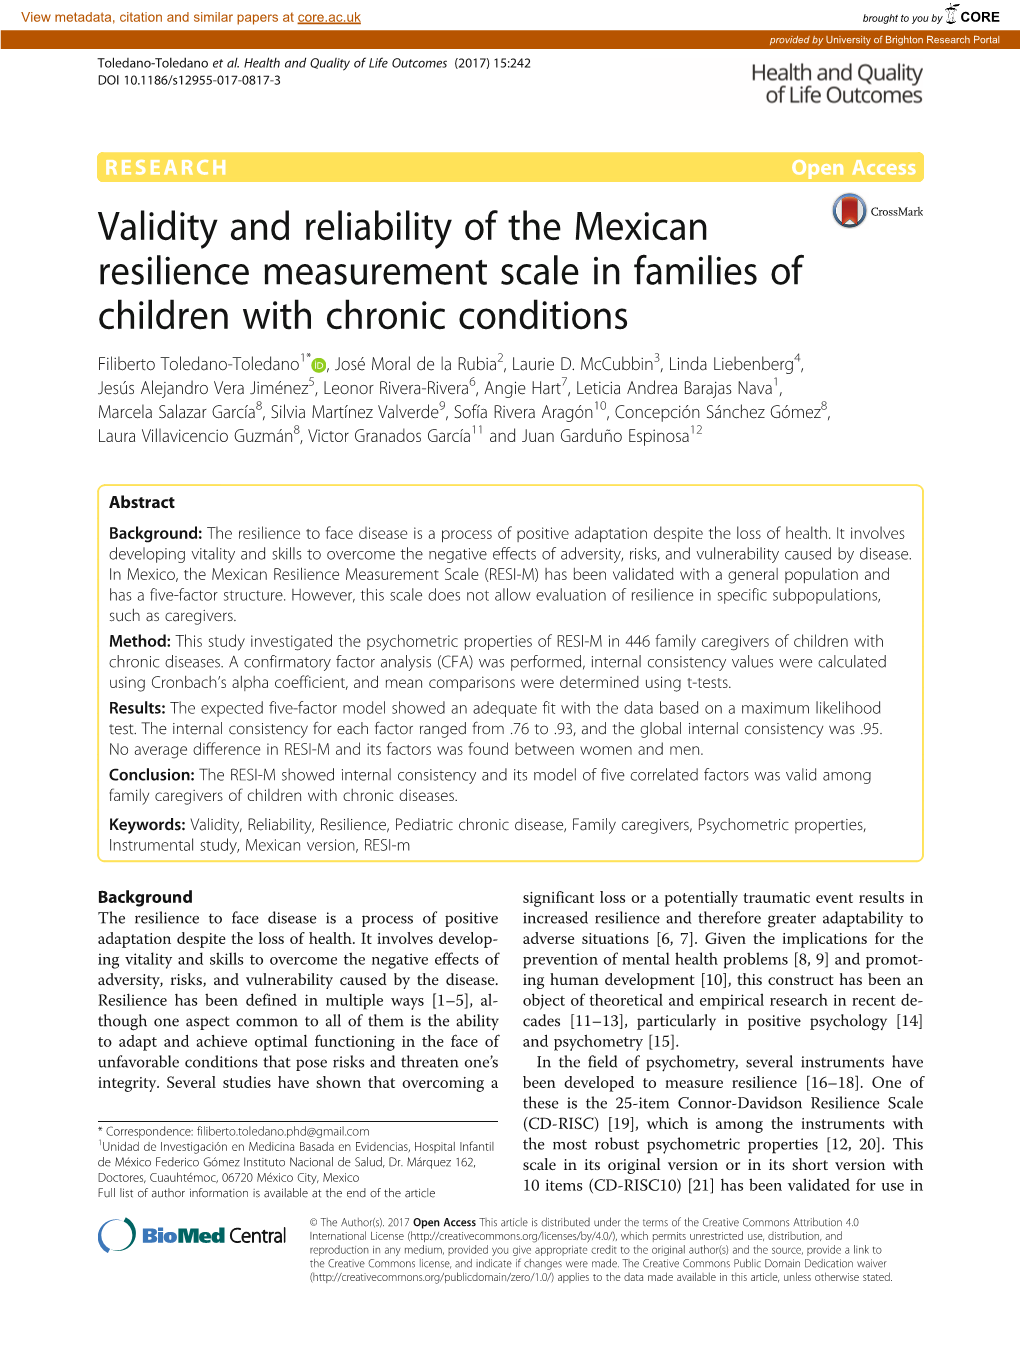 Validity and Reliability of the Mexican Resilience Measurement Scale In